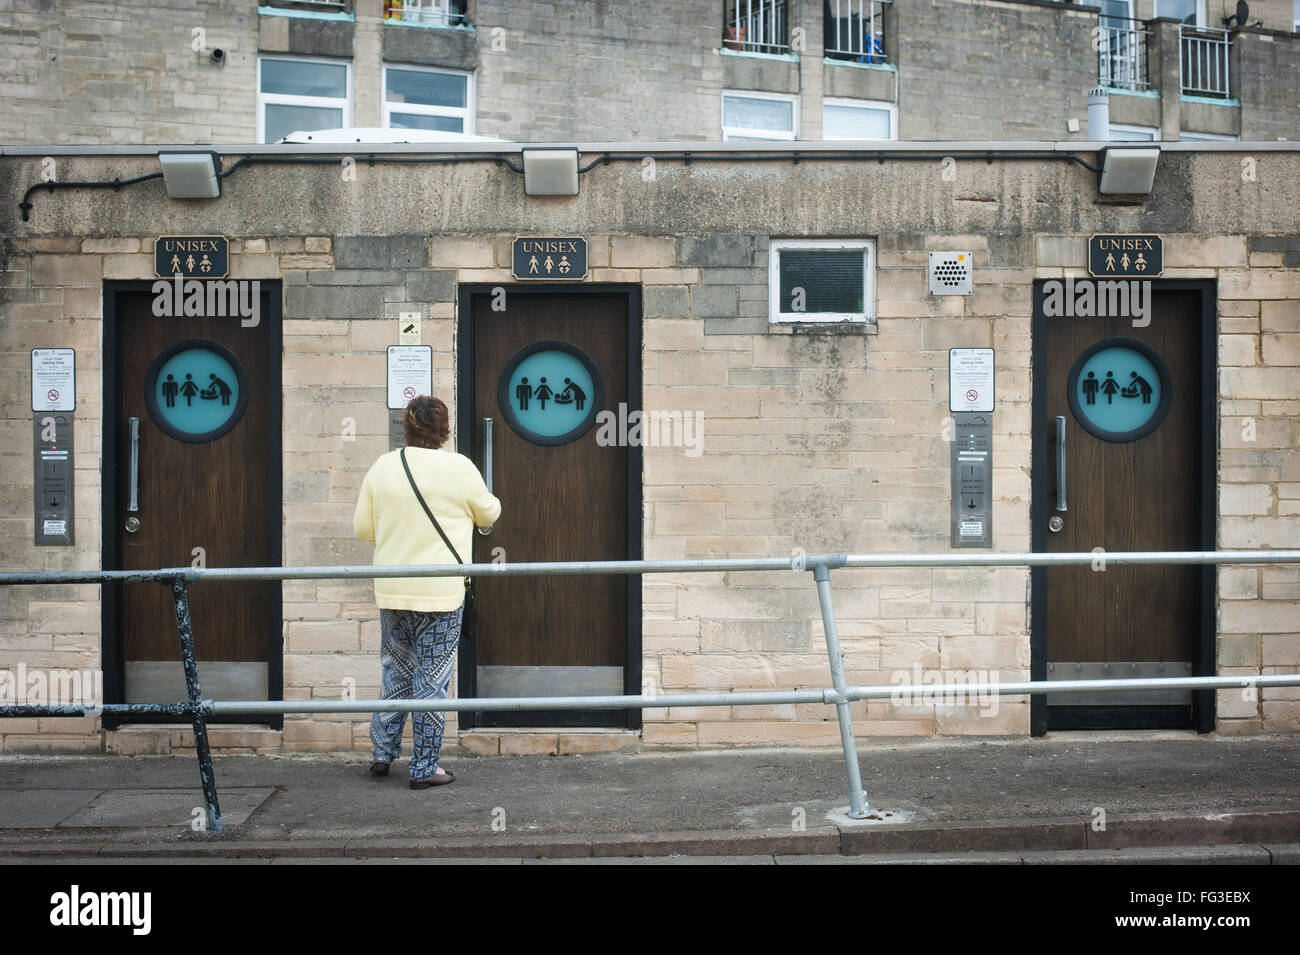 Woman about to use public toilets in Cirencester, Cotswolds Stock Photo